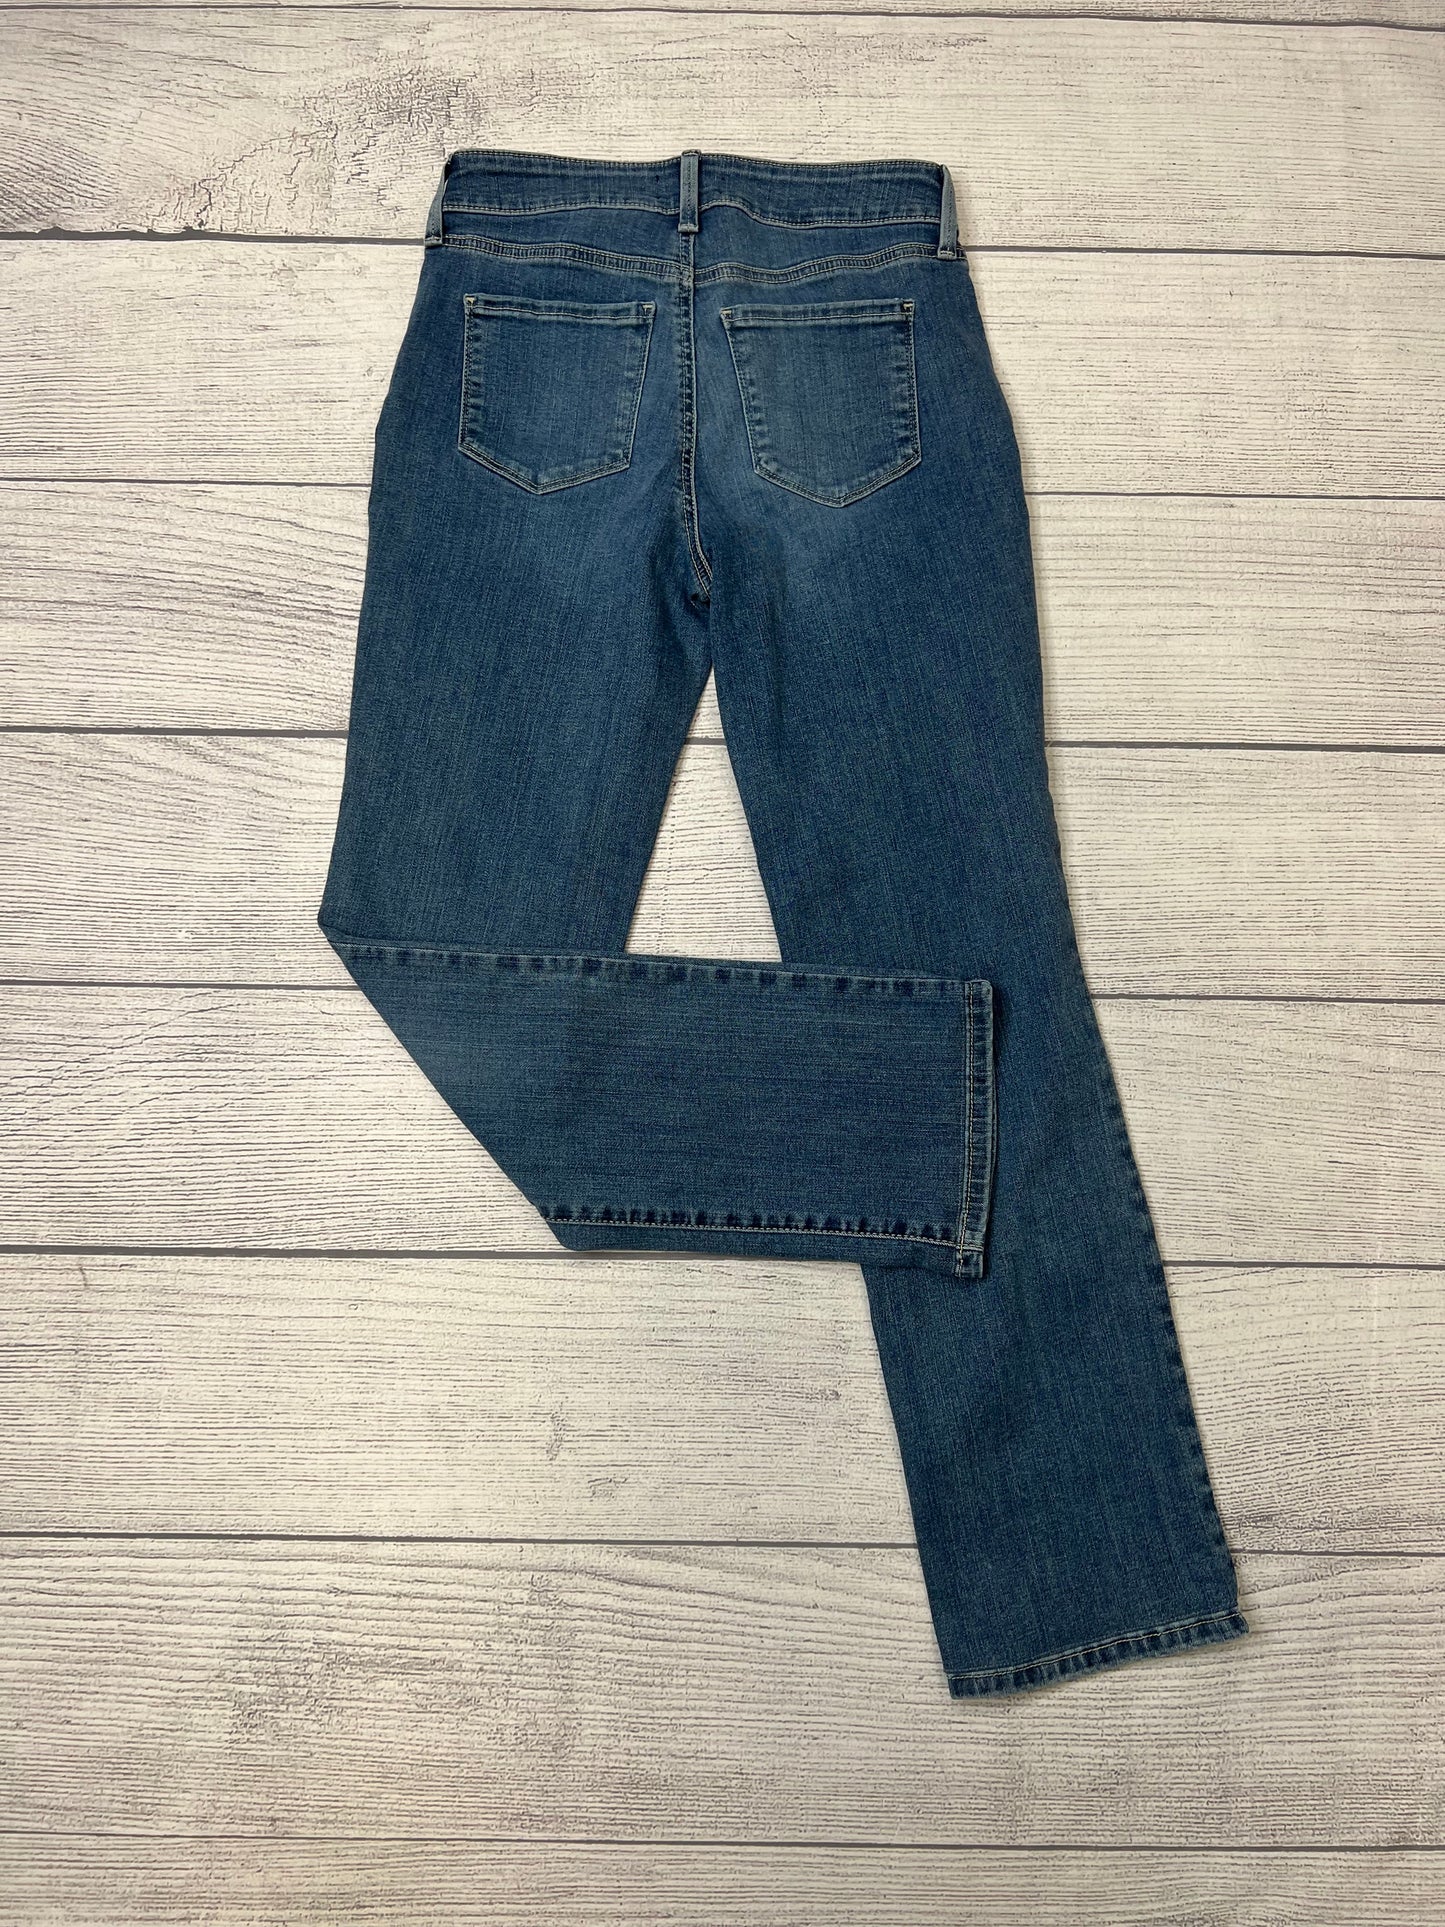 Jeans Designer By Not Your Daughters Jeans  Size: 0